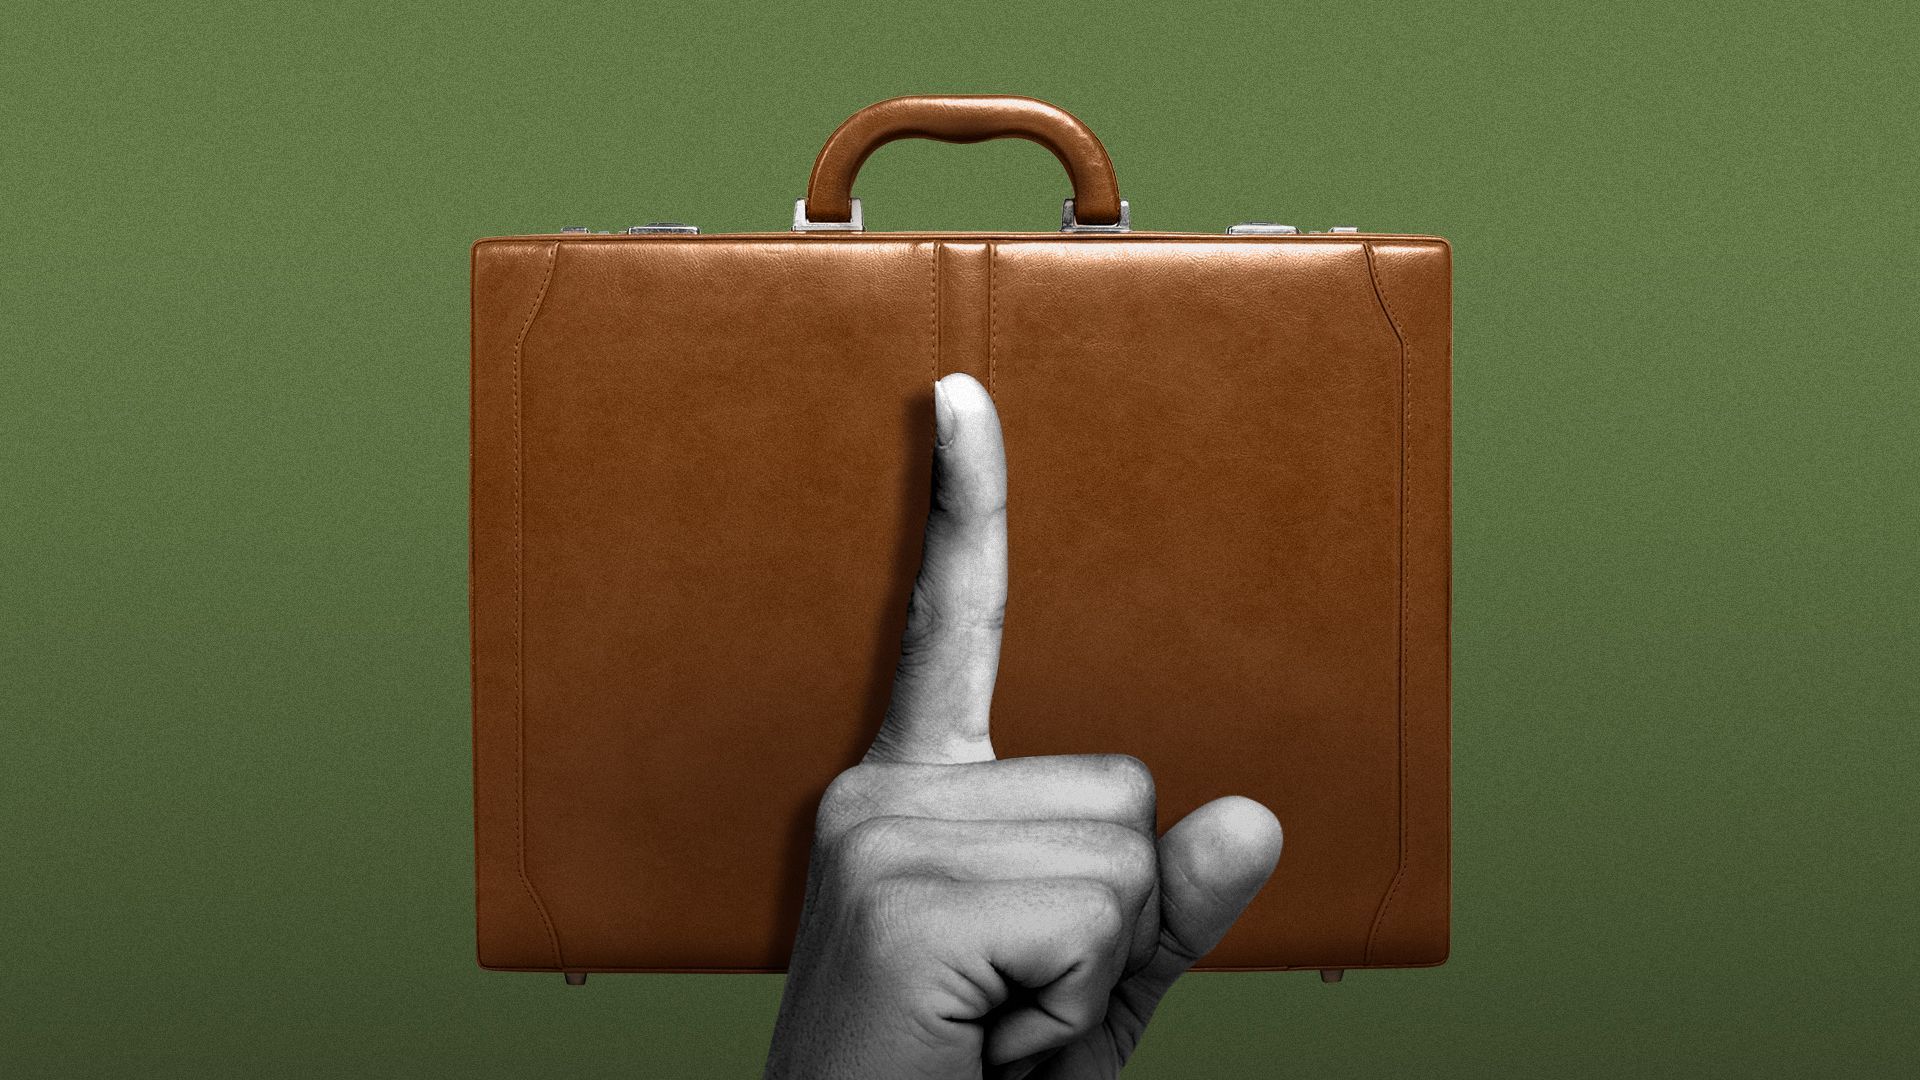 Illustration of a briefcase with a finger making the "shh" signal in front of it.